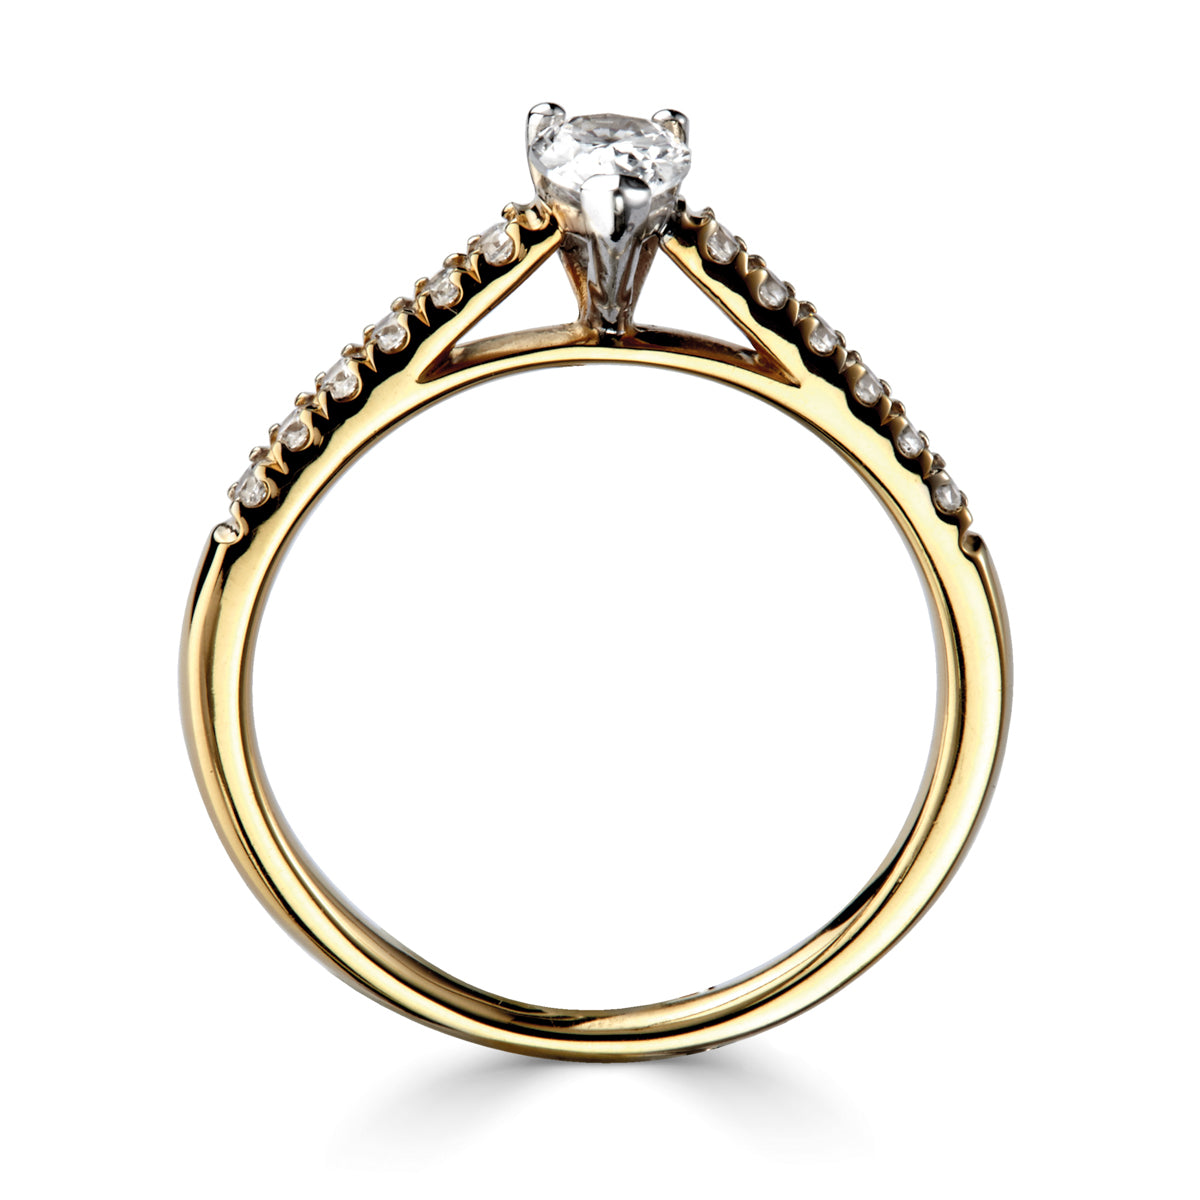 Pear cut diamond set into a classic 3 claw setting with diamond set shoulders ring